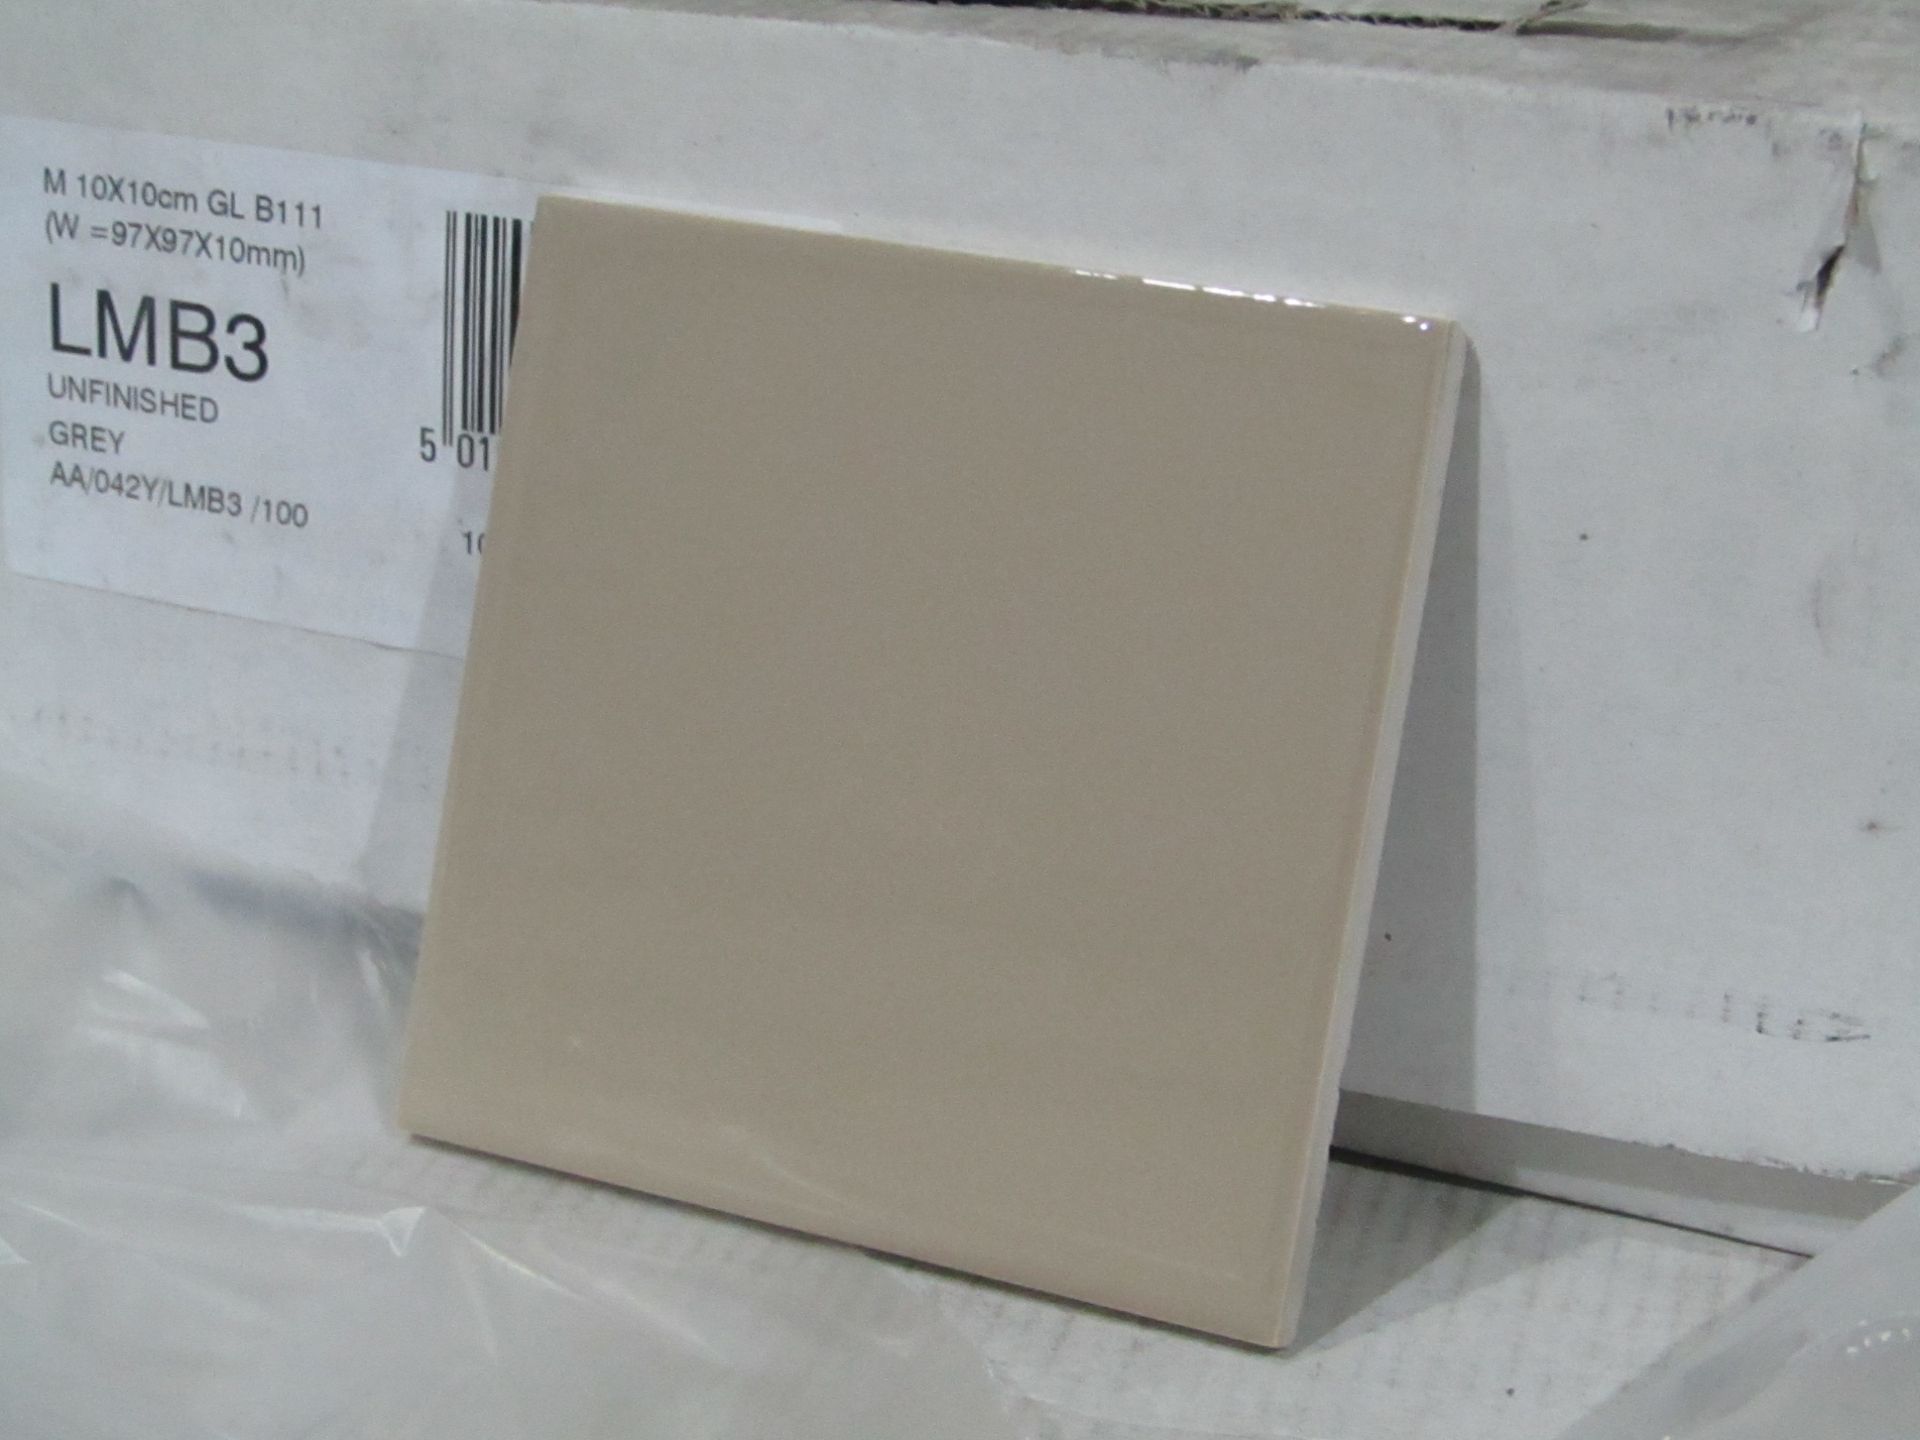 84x Packs of 100 Unfinished Grey (LMB3 100) 100 x 100mm tiles, all new and palletised. RRP £14.99